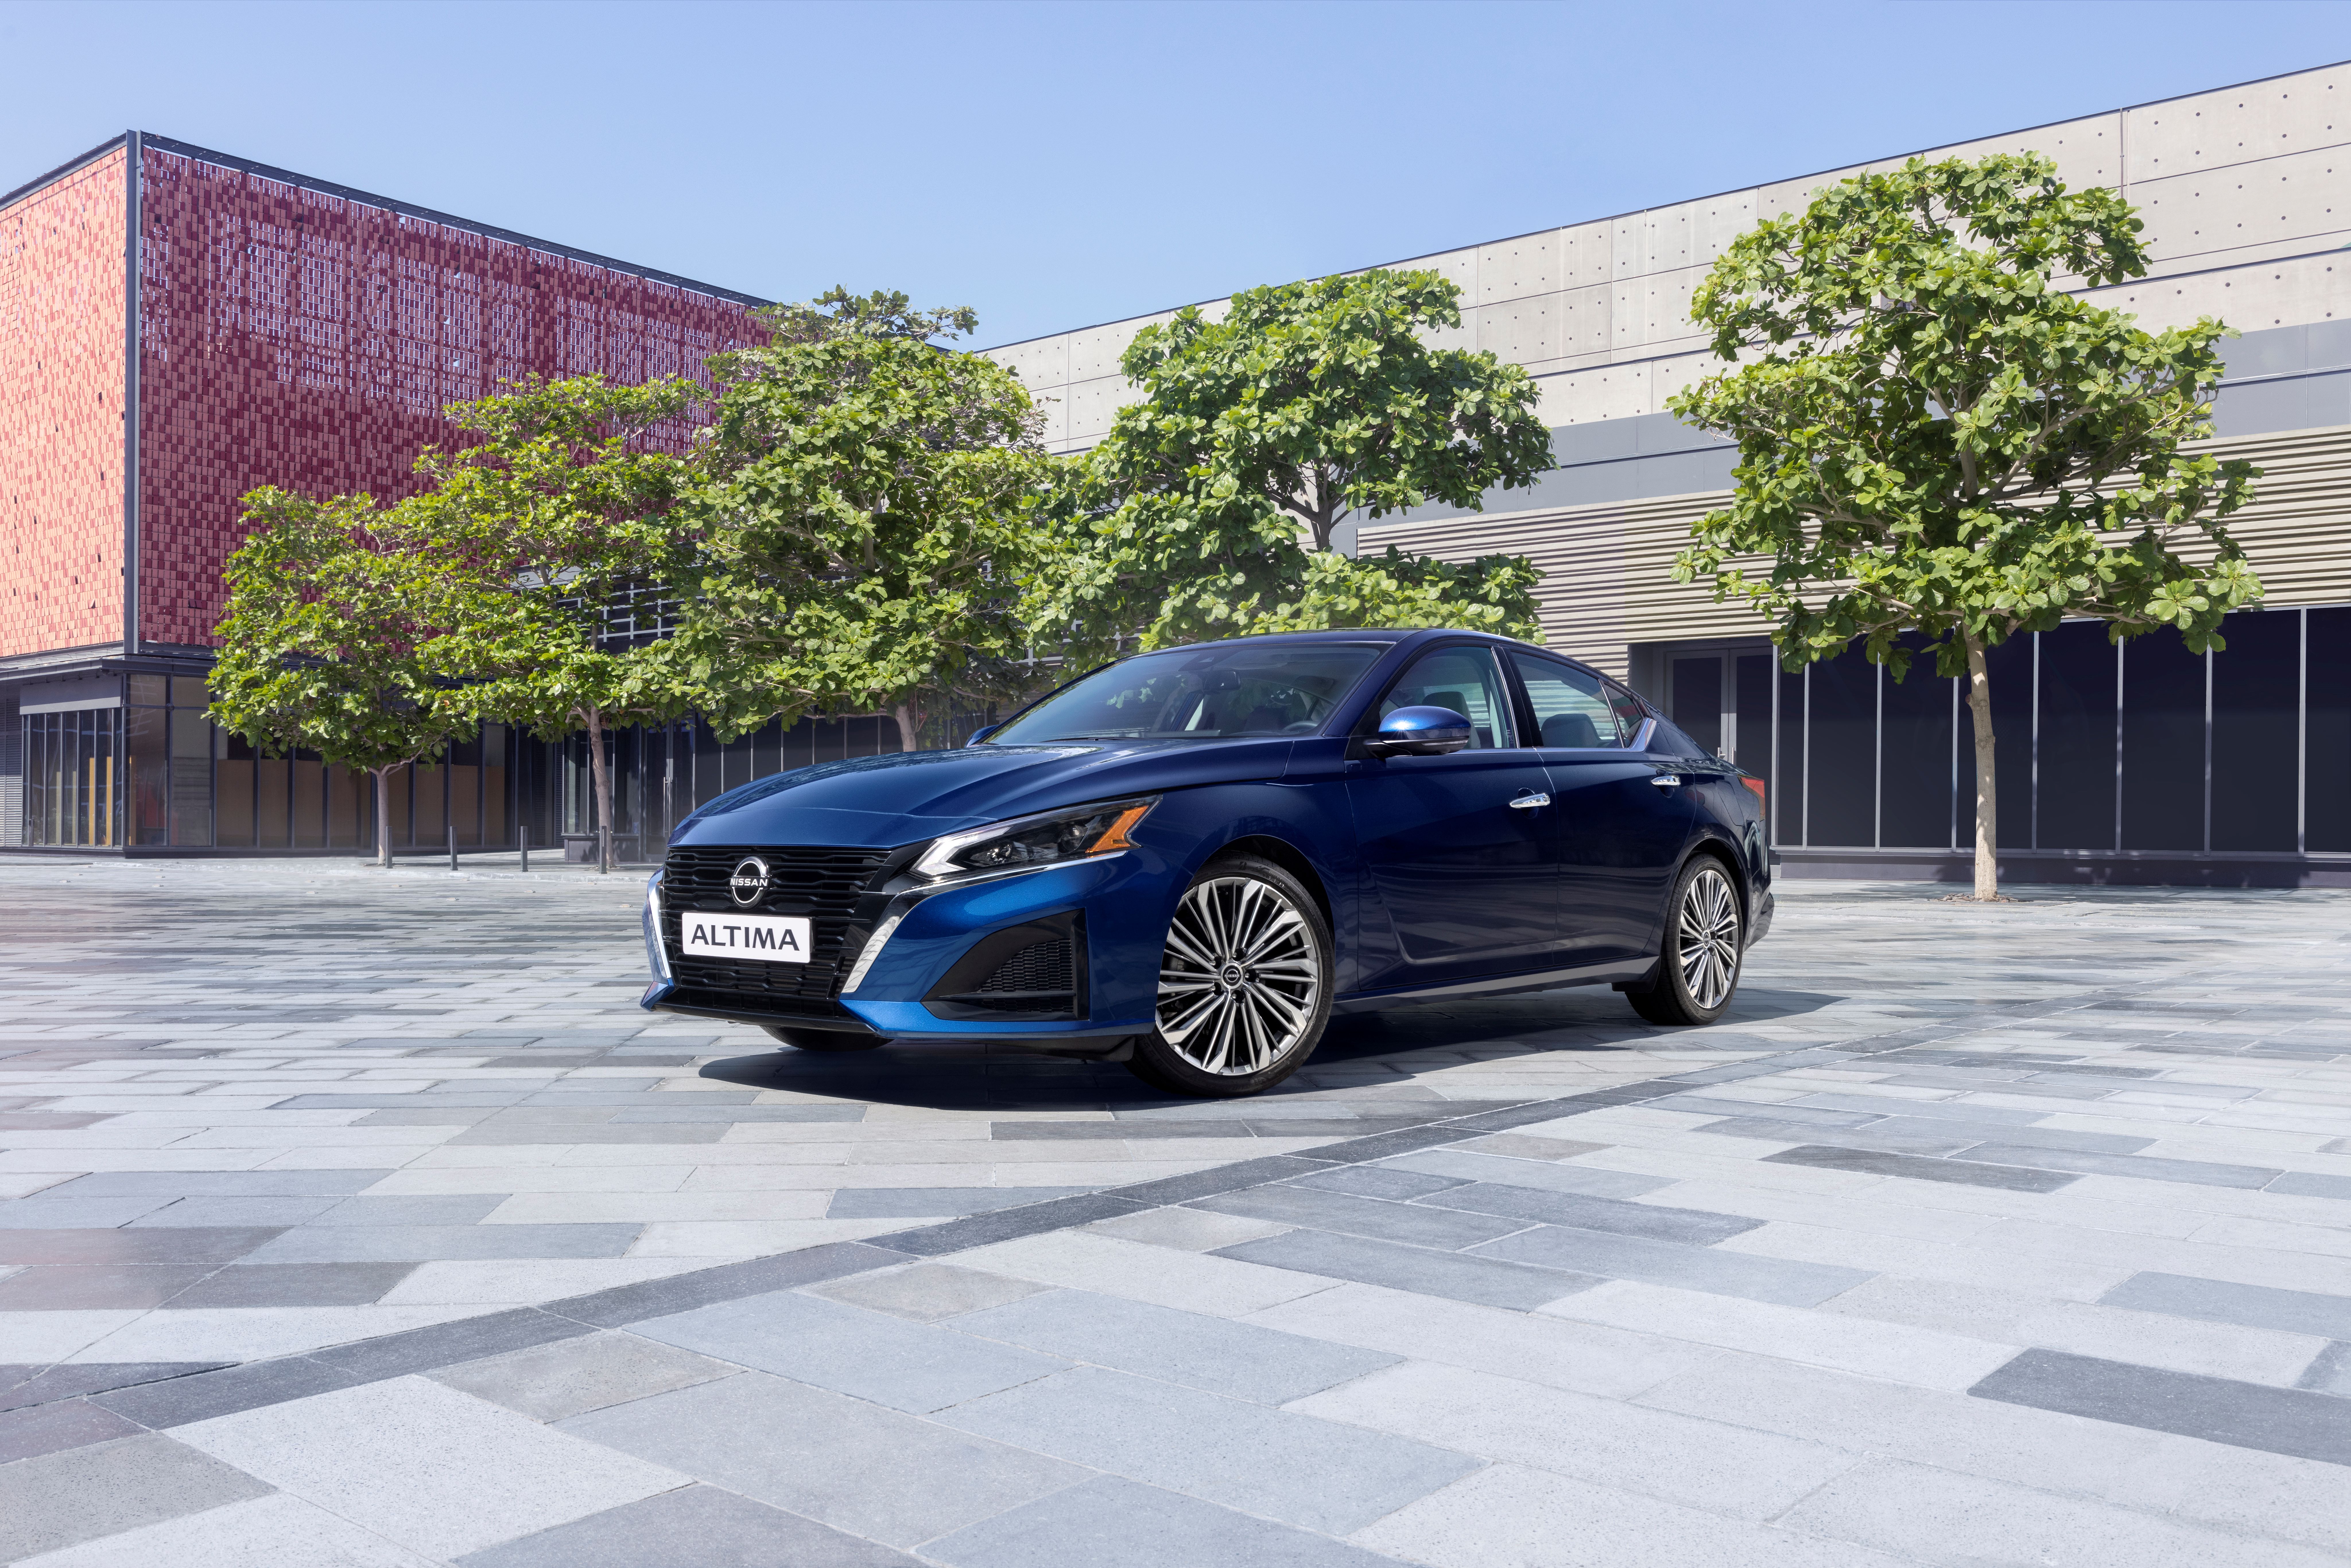 The New Nissan Altima ticks all the right boxes with record sales for the latest model in Abu Dhabi